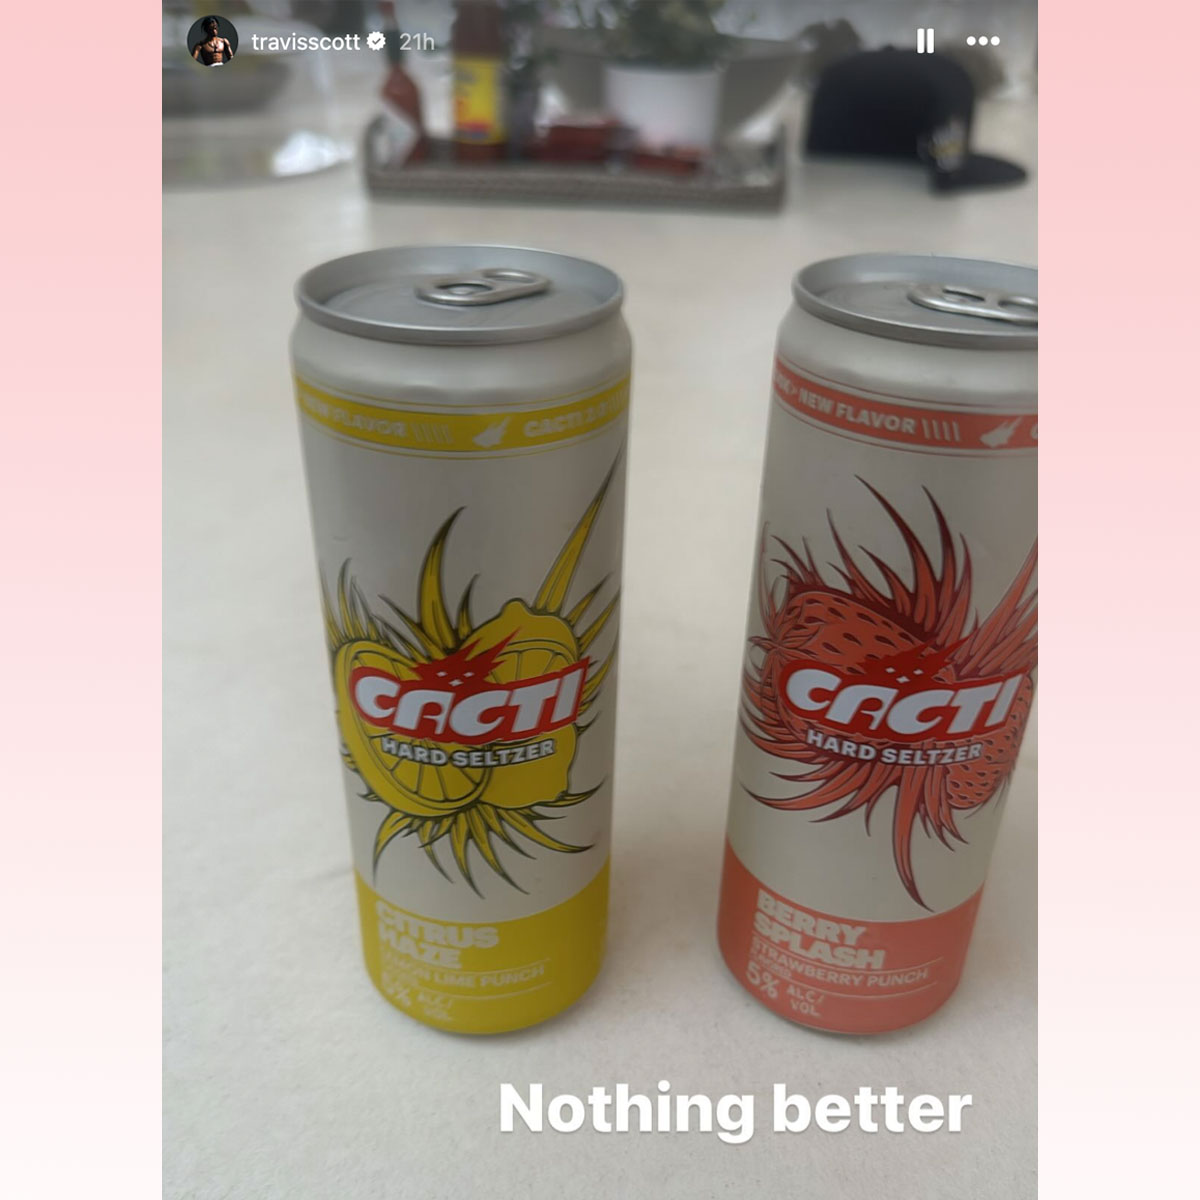 Fans Think Travis Scott Shaded Kylie Jenner's New Drinks!